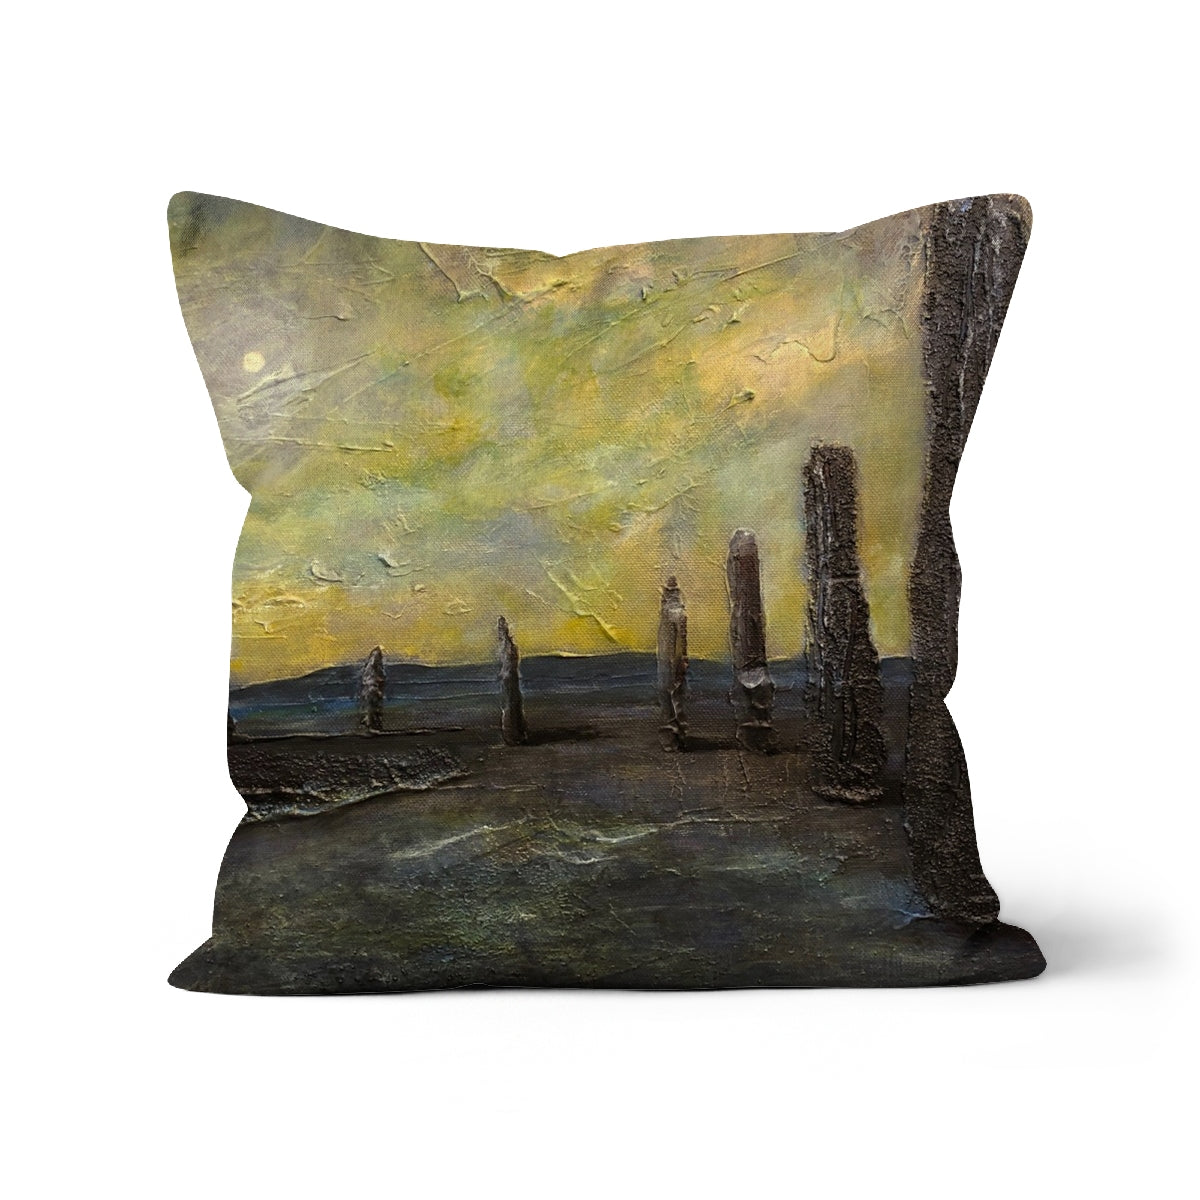 An Ethereal Ring Of Brodgar Art Gifts Cushion-Cushions-Orkney Art Gallery-Canvas-16"x16"-Paintings, Prints, Homeware, Art Gifts From Scotland By Scottish Artist Kevin Hunter